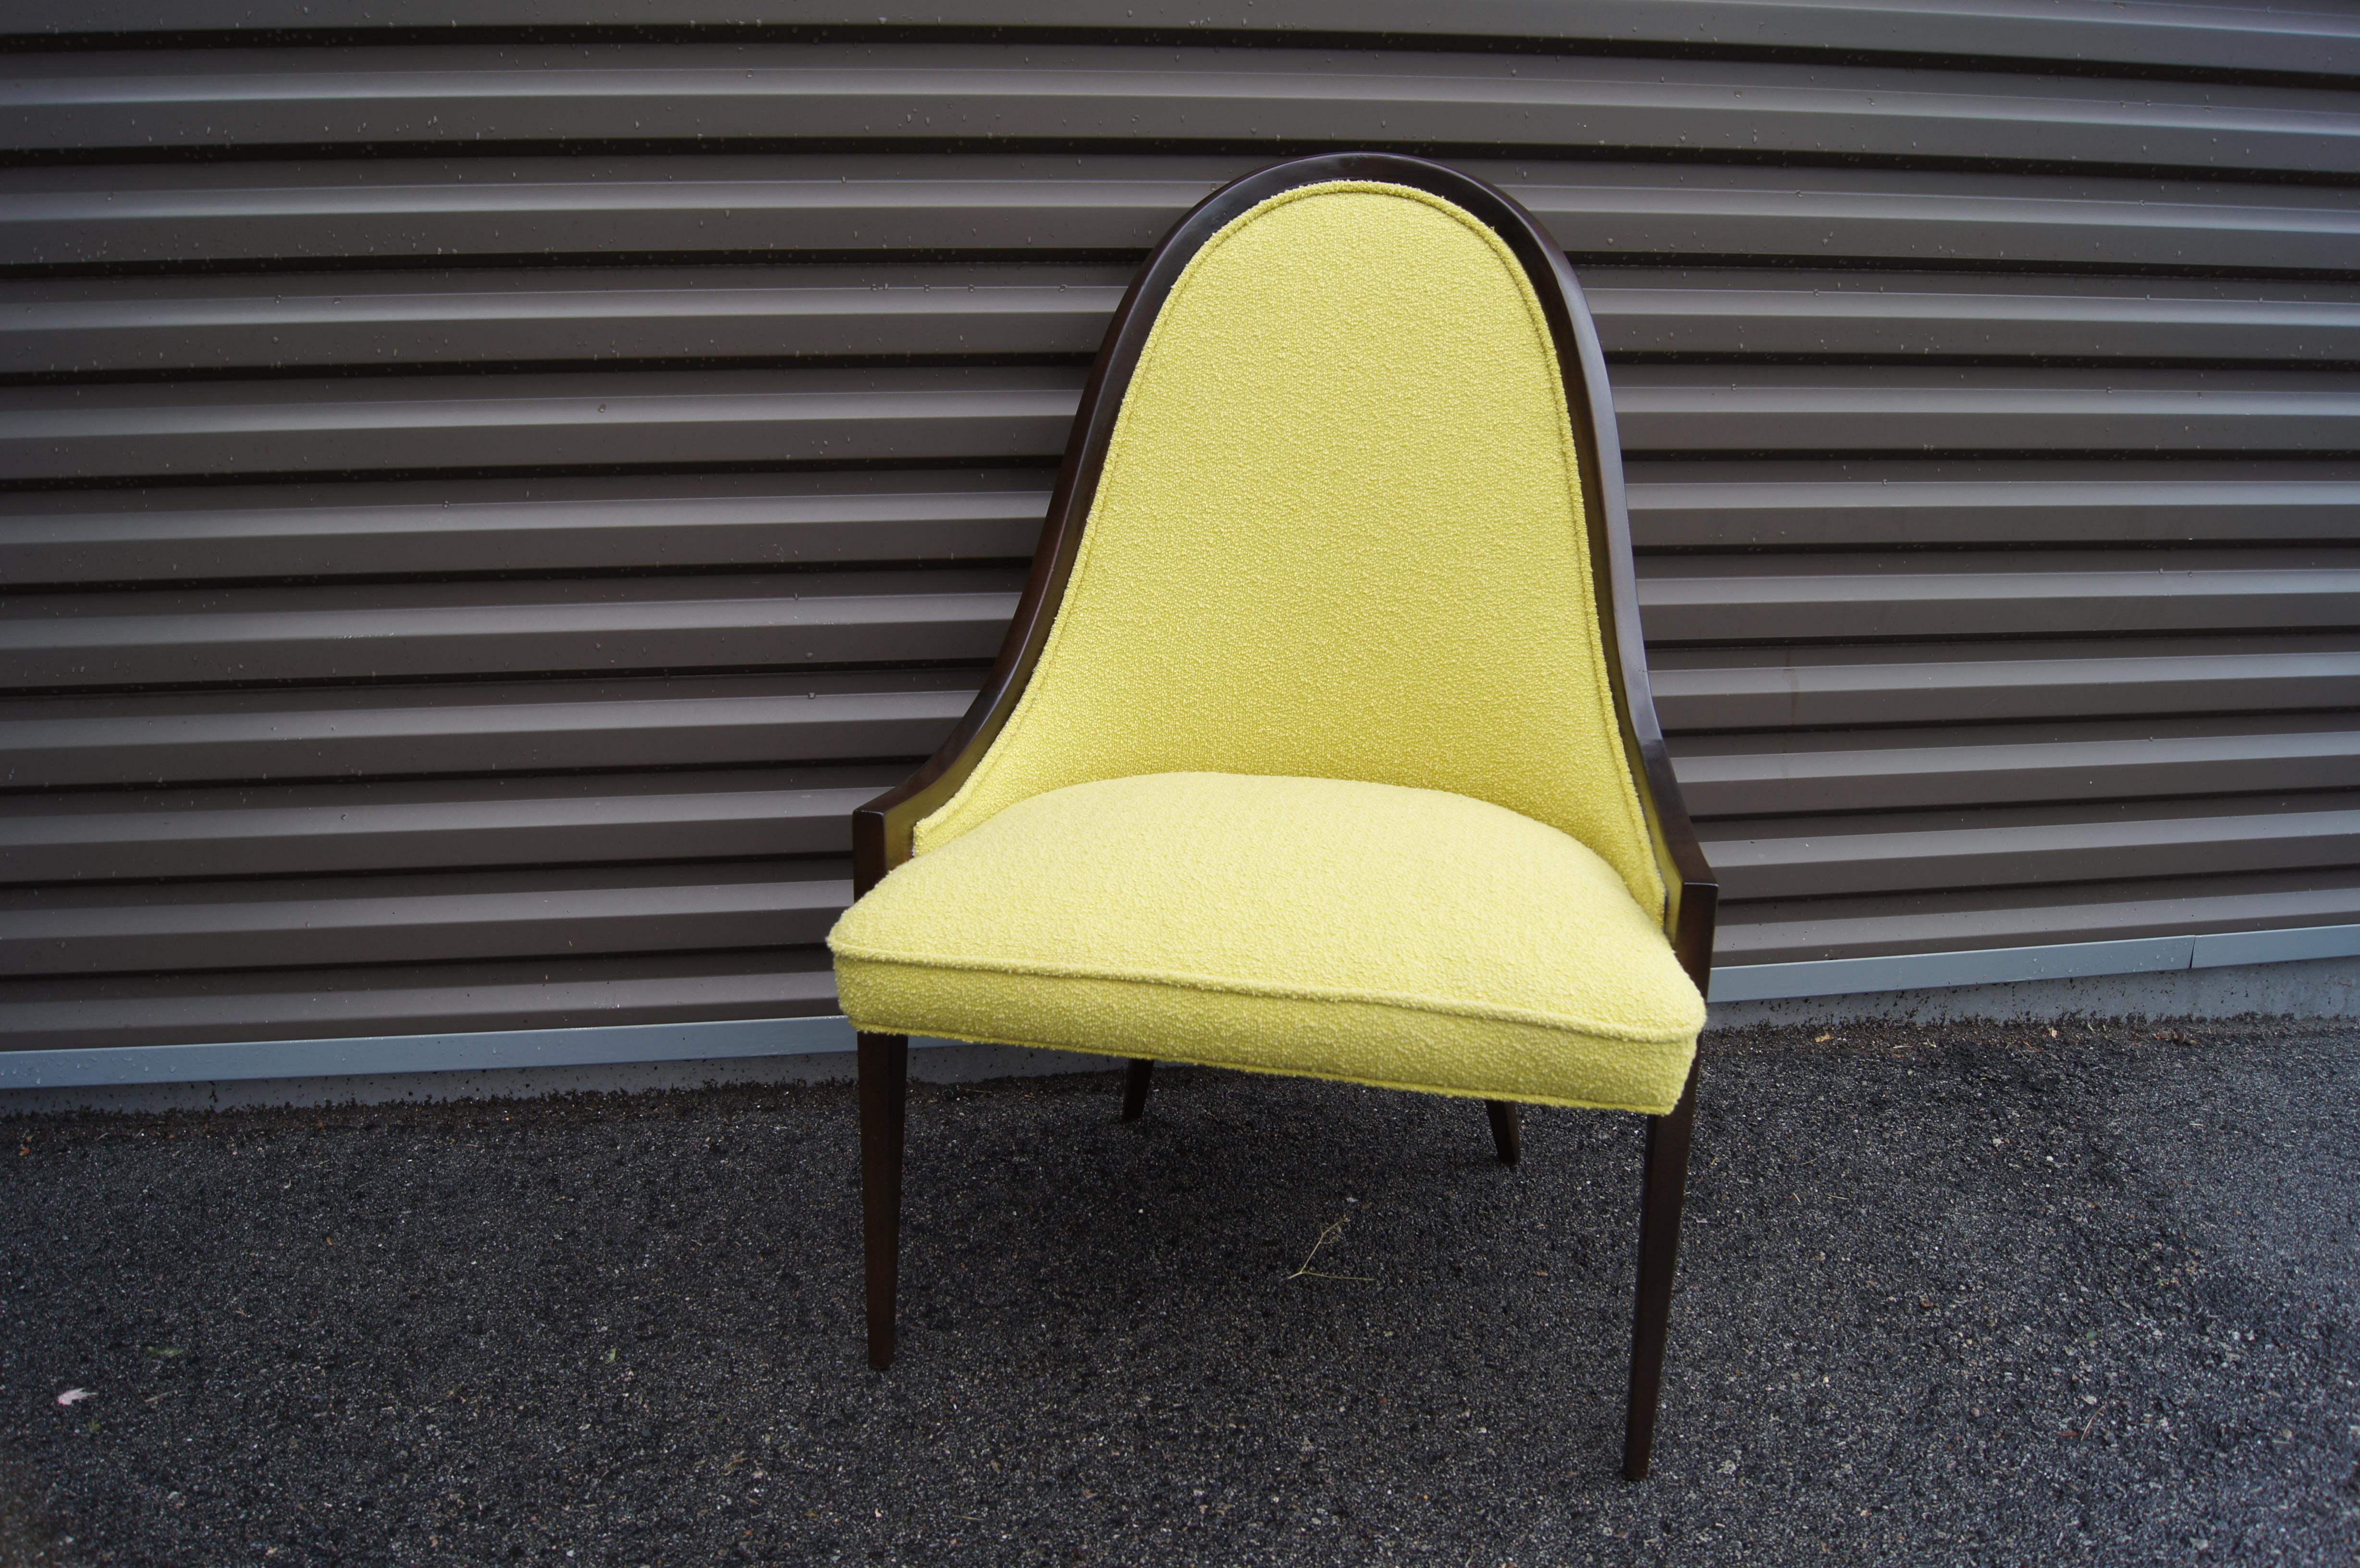 Harvey Probber designed his gondola chair, model no. 1053, with an elegantly curved high-back frame in deep mahogany. The chair has been newly upholstered in Knoll's Classic Bouclé in an eye-catching chartreuse.